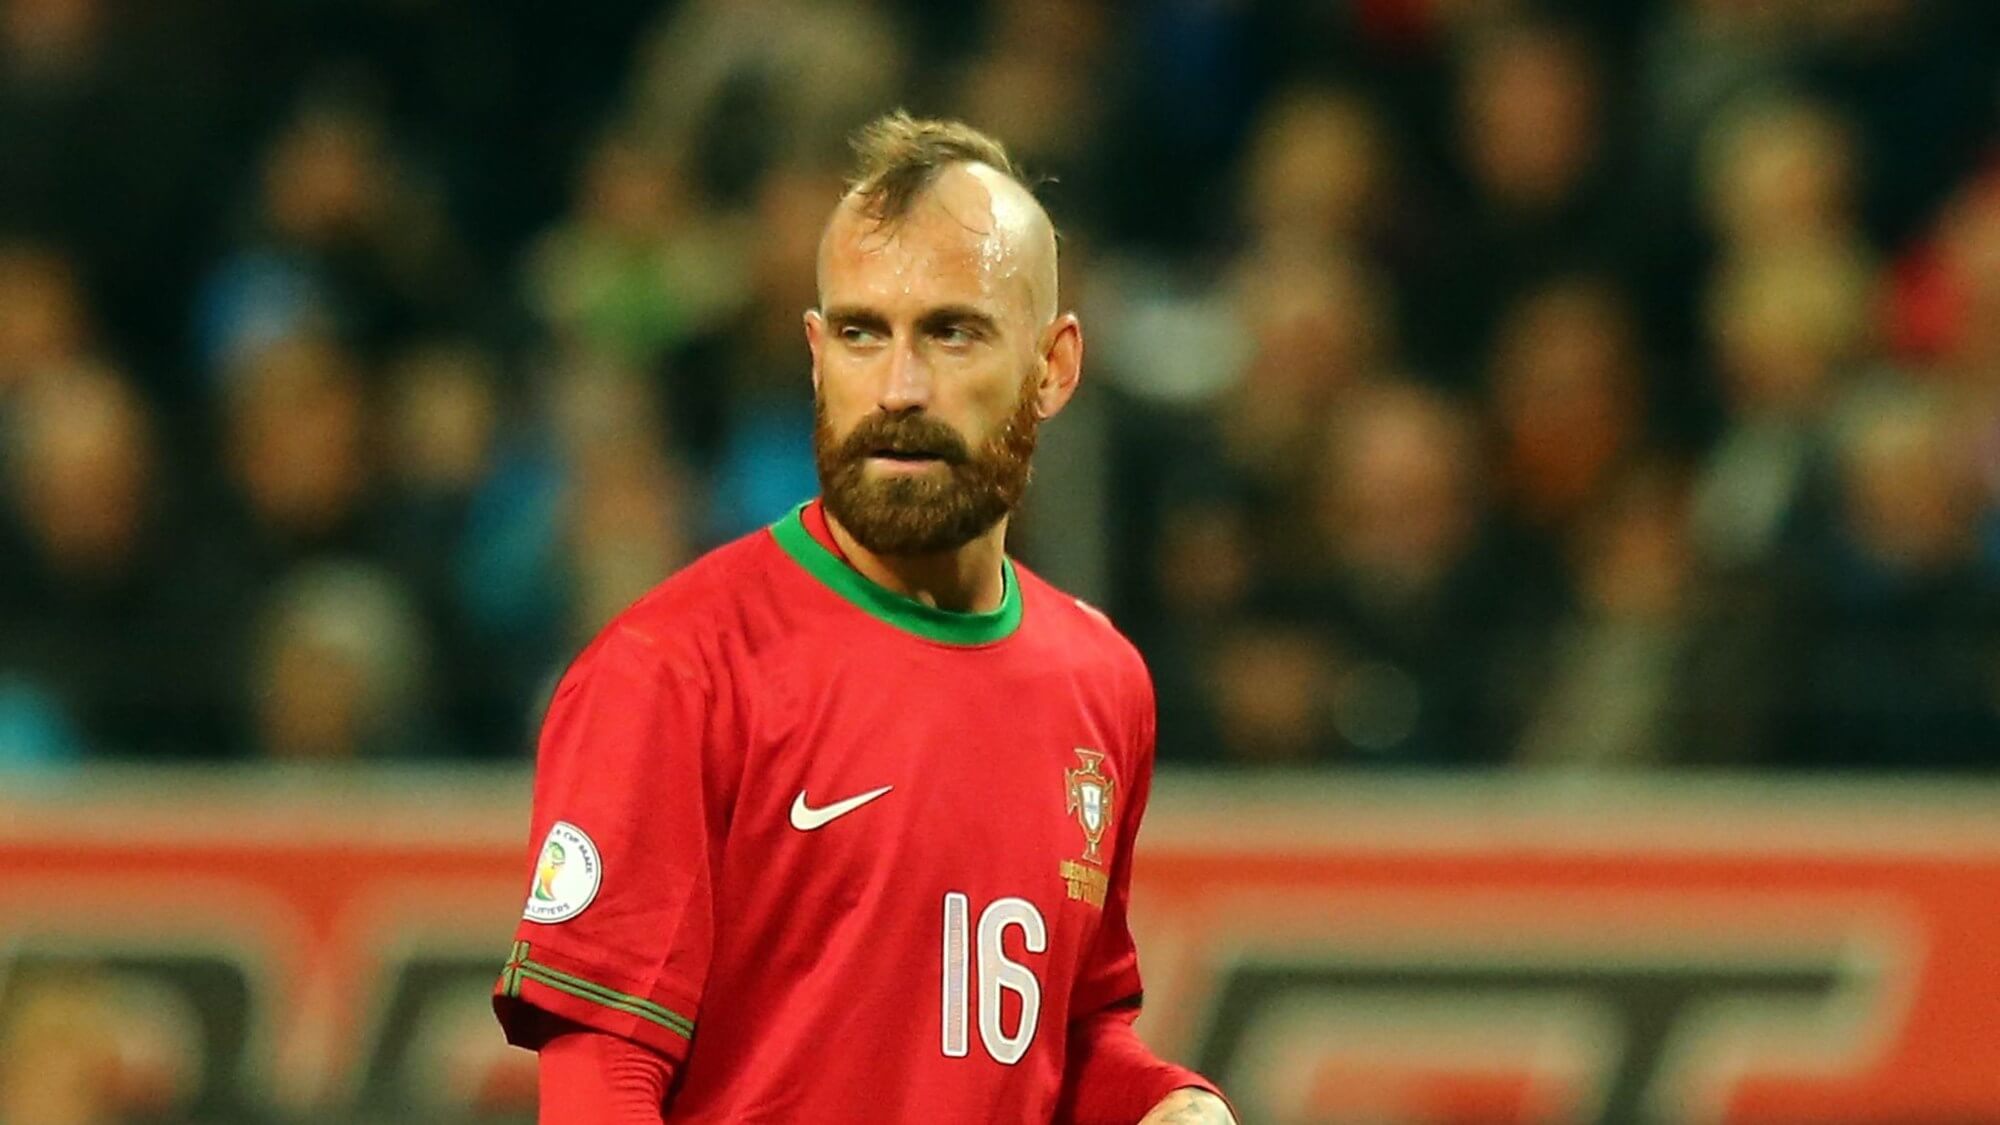 19-astounding-facts-about-raul-meireles